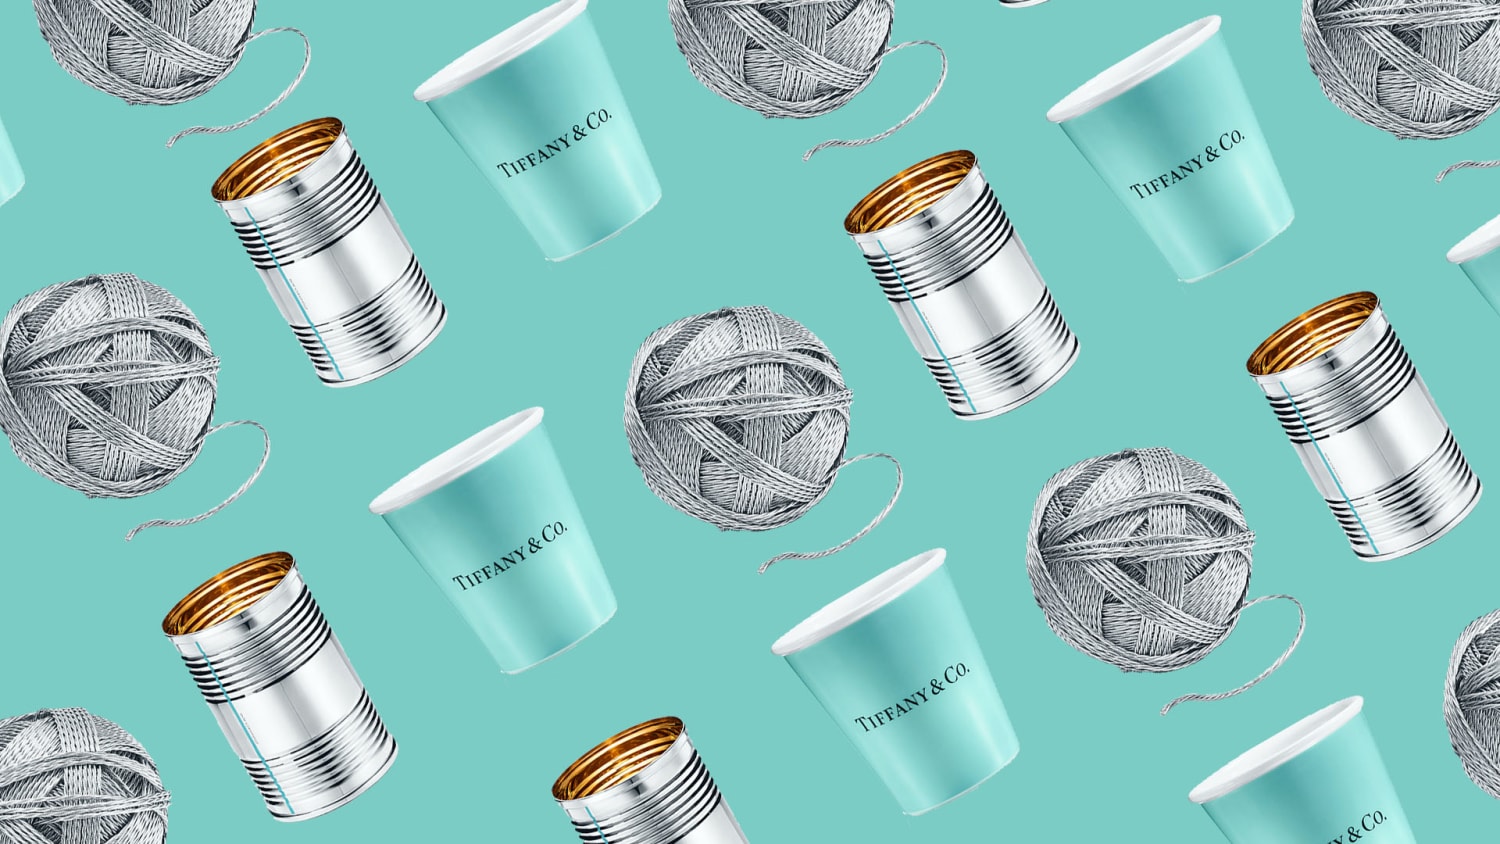 Tiffany & Co. launched an outrageously indulgent home and accessories line